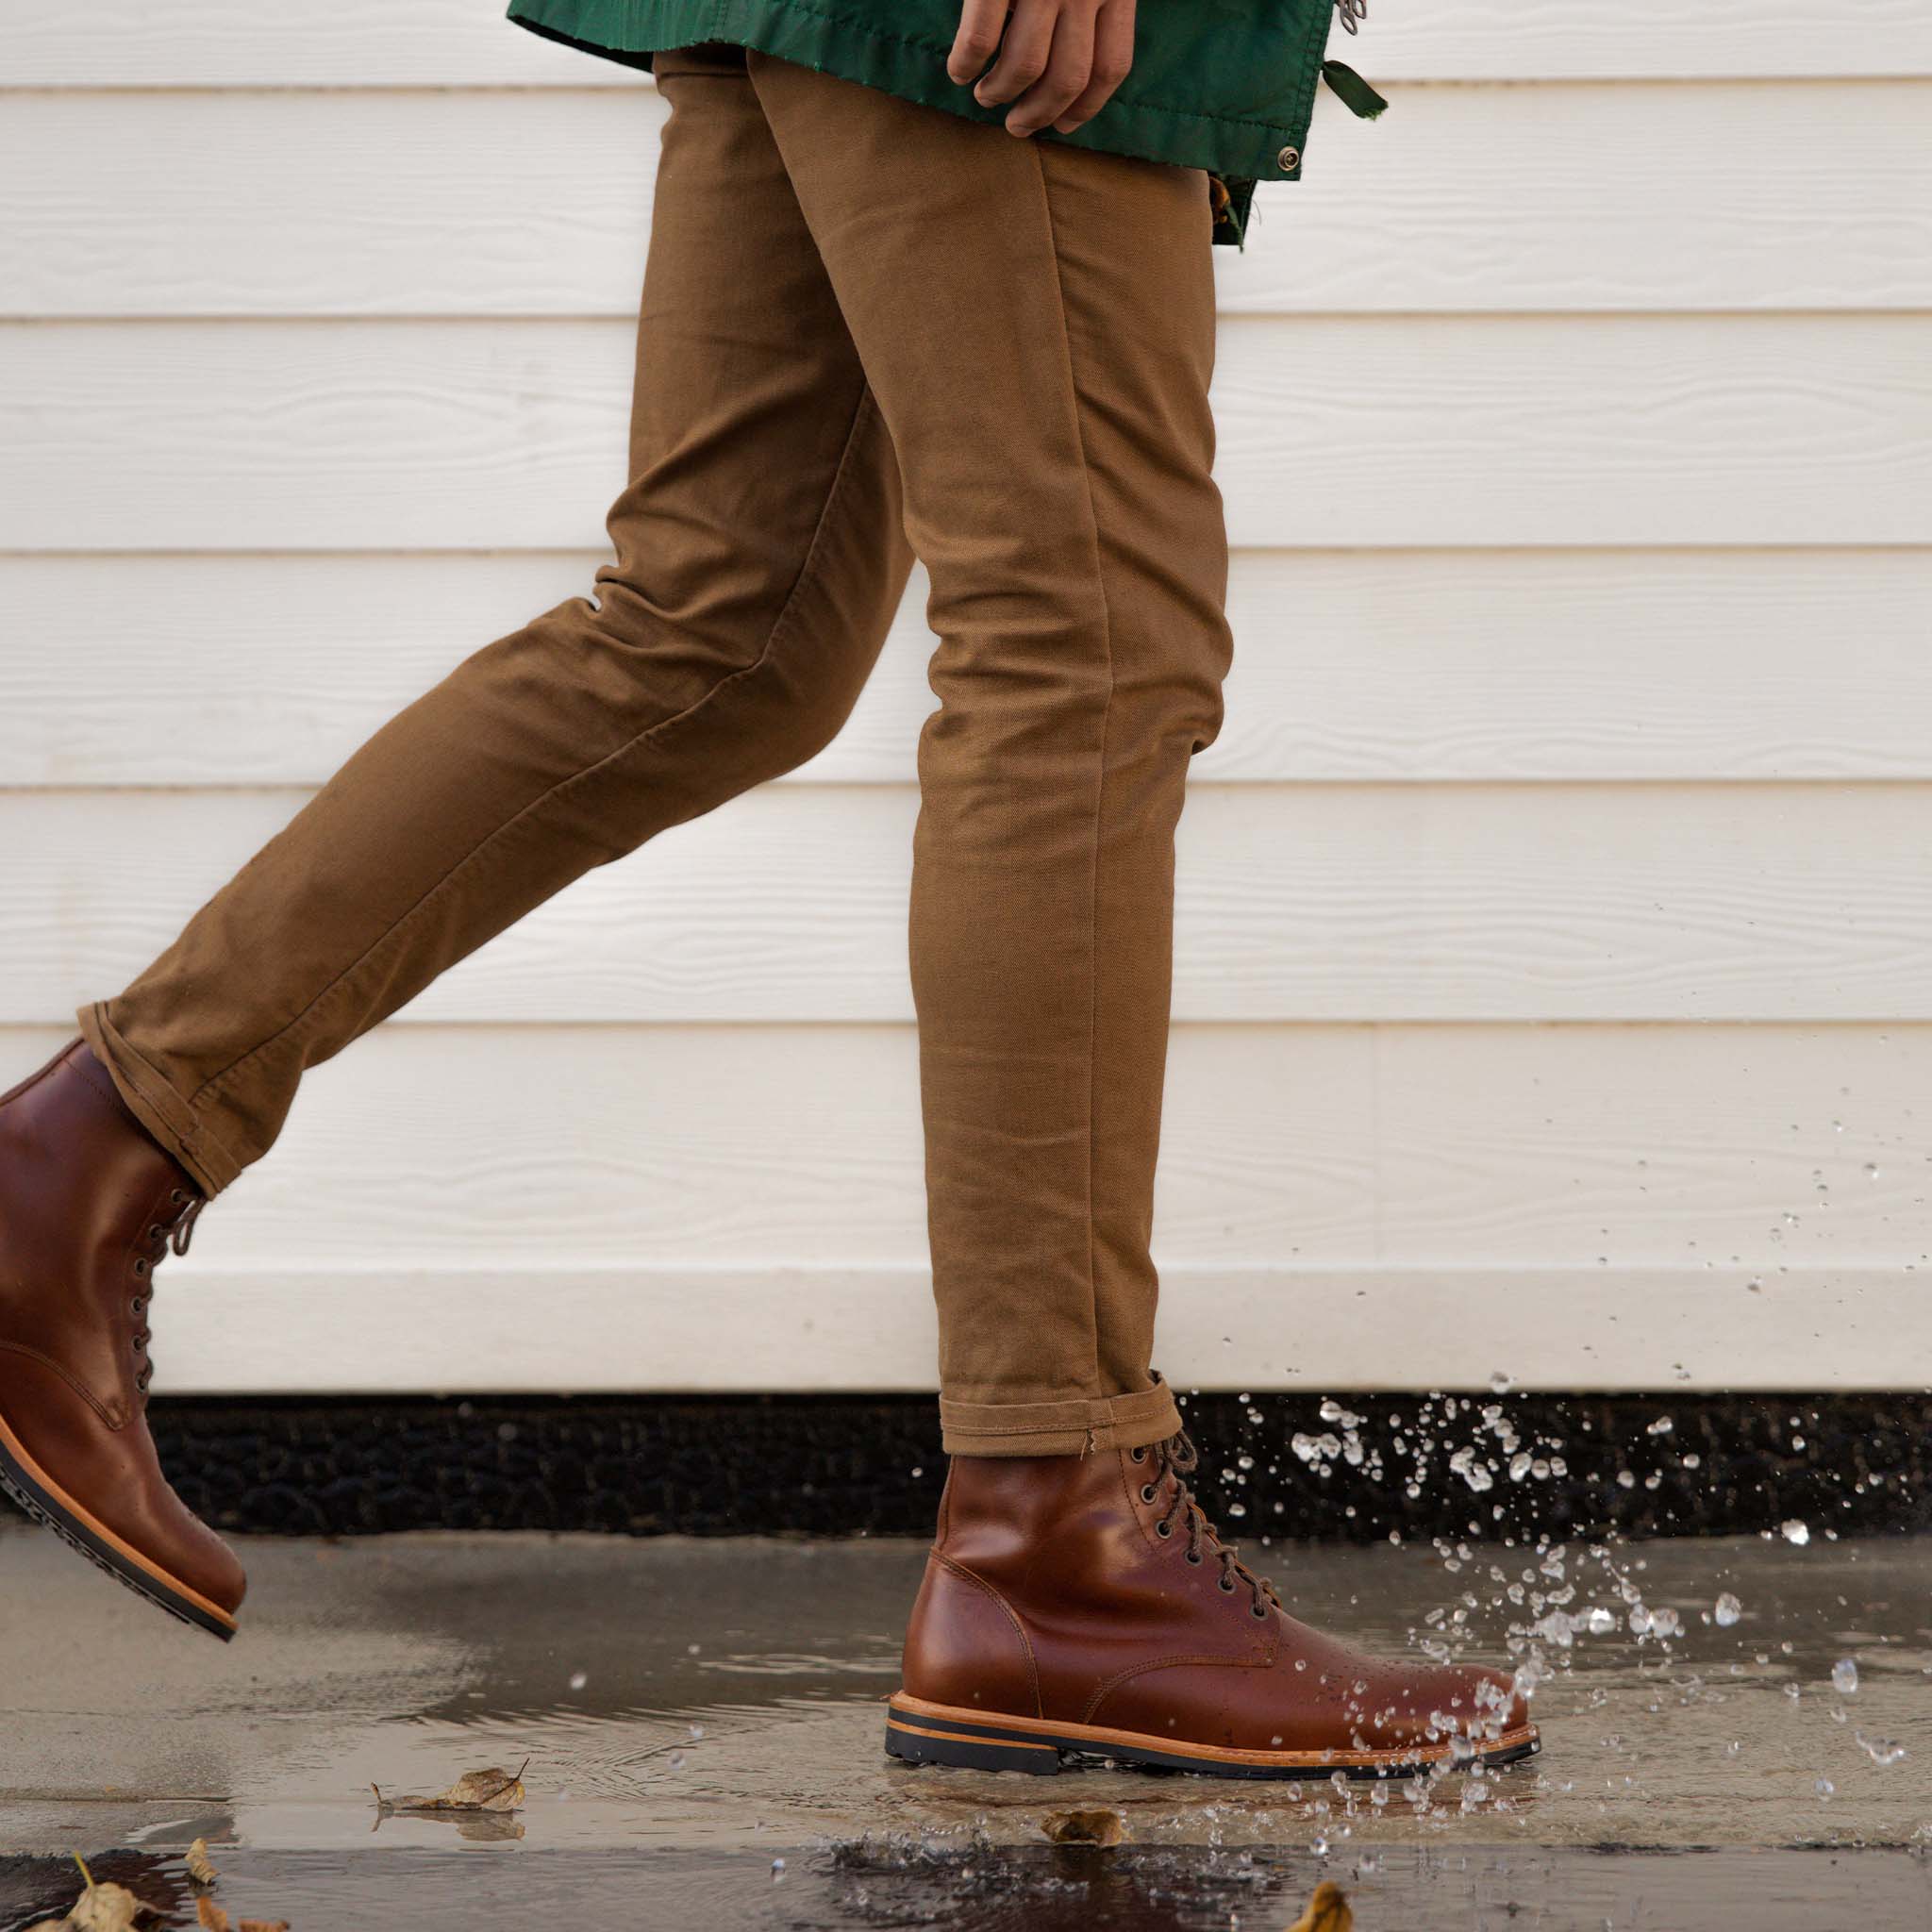 All-Weather Chelsea Boot Brandy